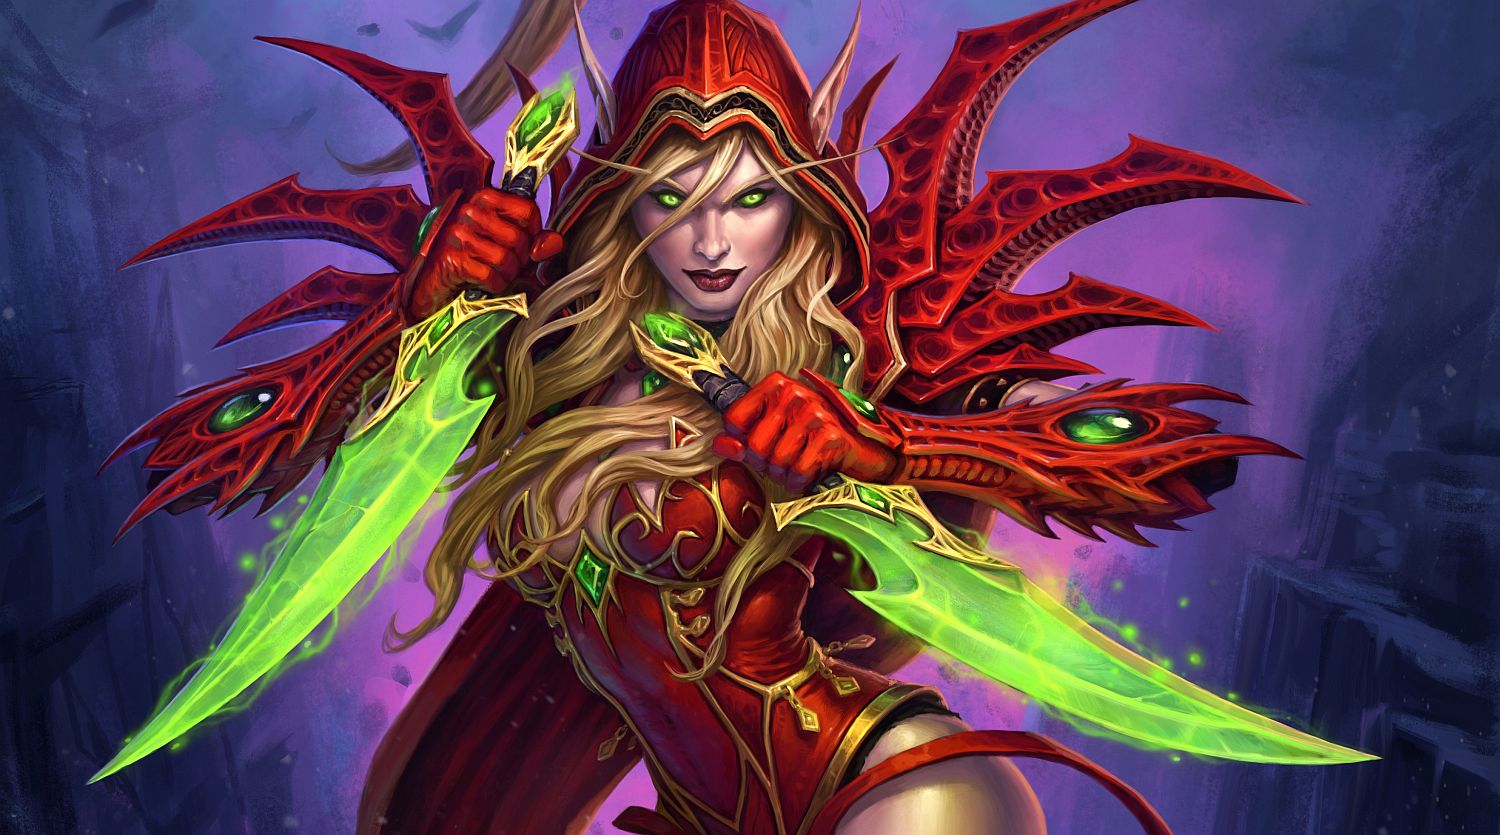 Image for Heroes of the Storm is getting a new character and its Valeera Sanguinar